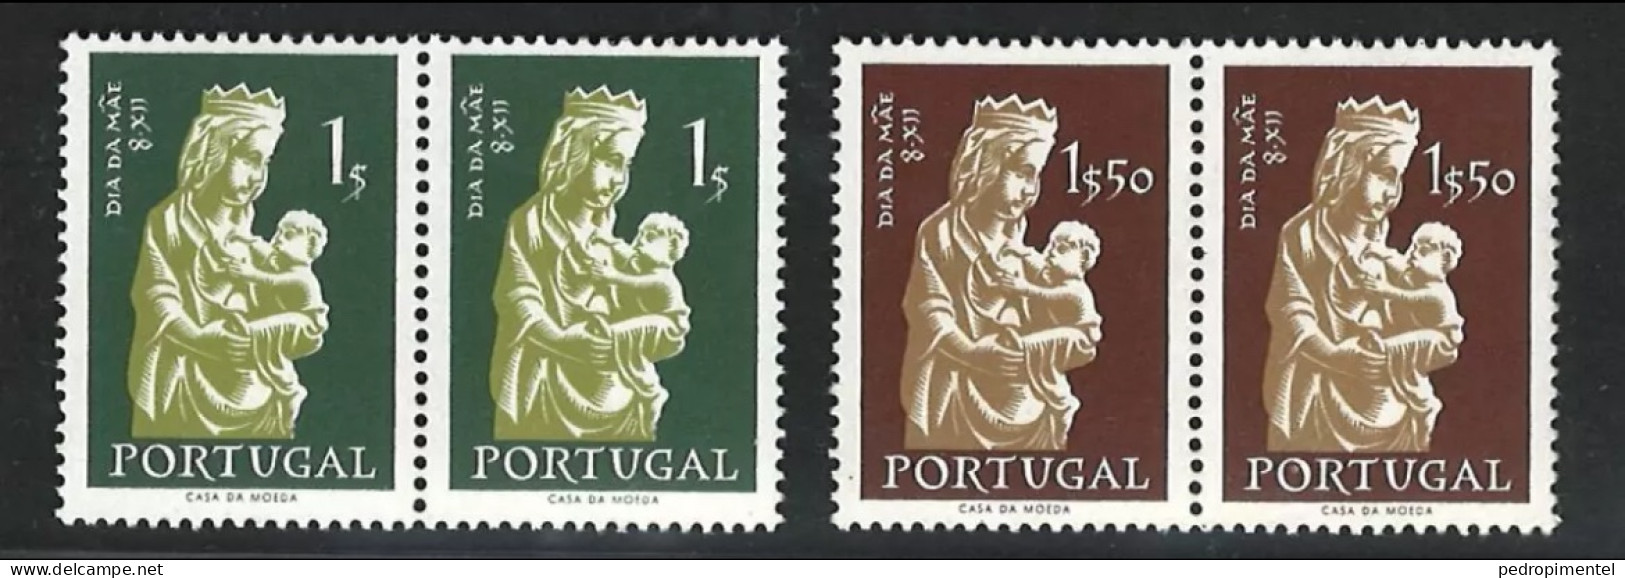 Portugal Stamps 1956 "Mothers Day" Condition MNH #825-826 (Pair) - Ongebruikt